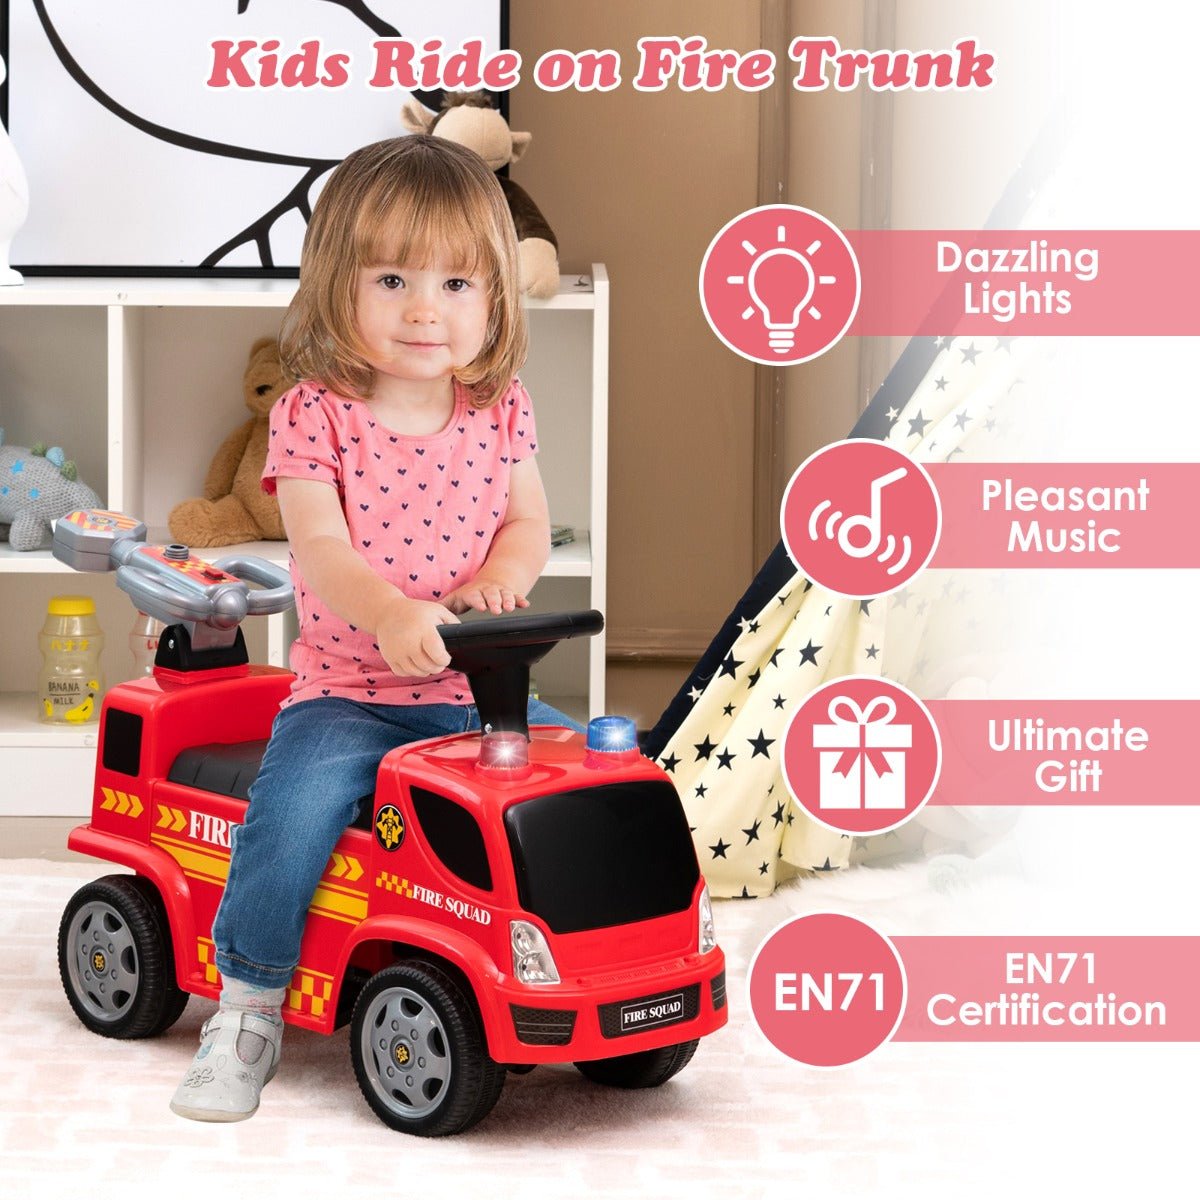 Safe and Fun: Ride On Fire Truck for Kids with Bubble Functionality